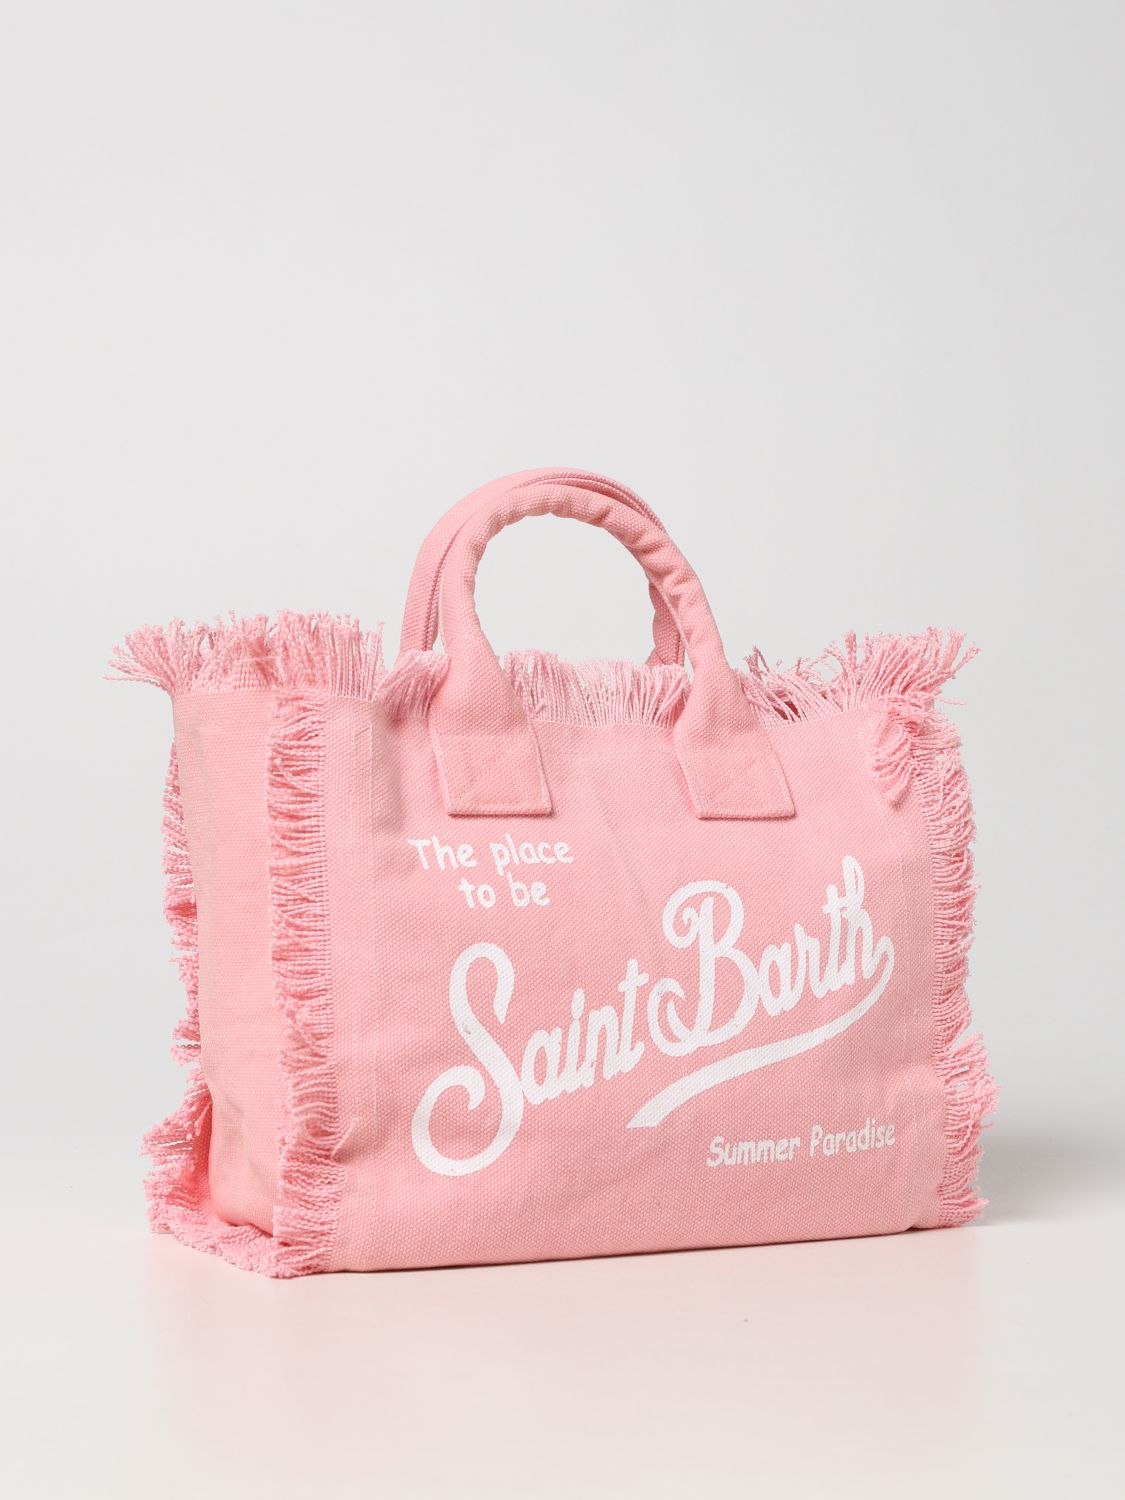 MC2 SAINT BARTH kids' bags, compare prices and buy online